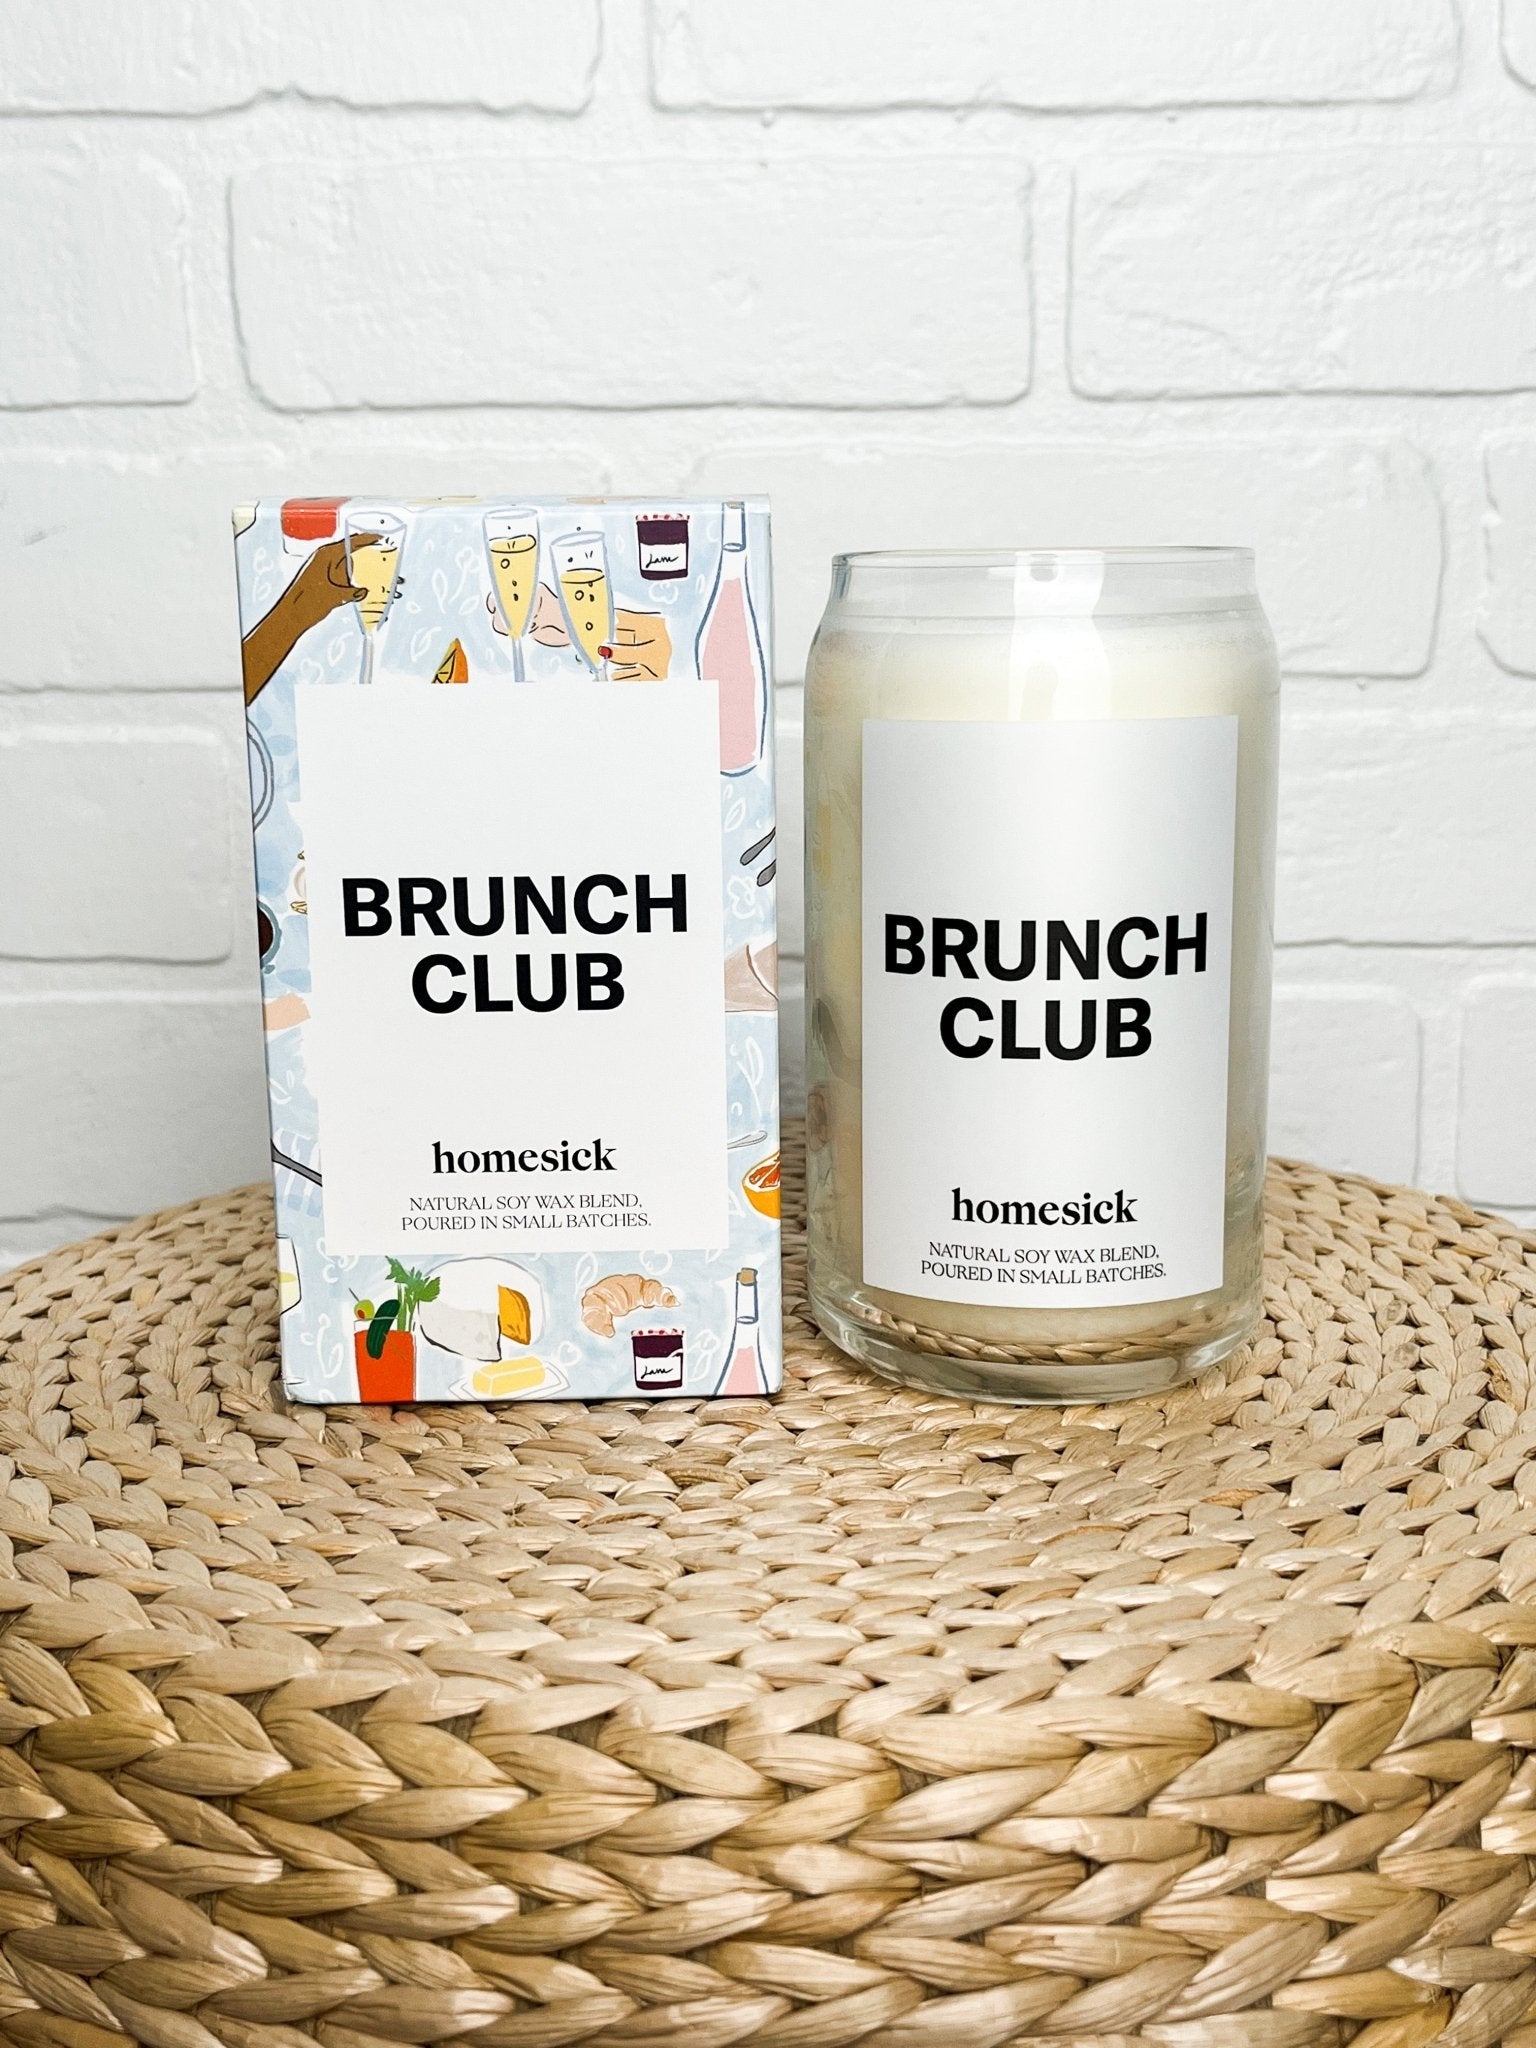 Homesick Brunch Club candle - Trendy Candles at Lush Fashion Lounge Boutique in Oklahoma City